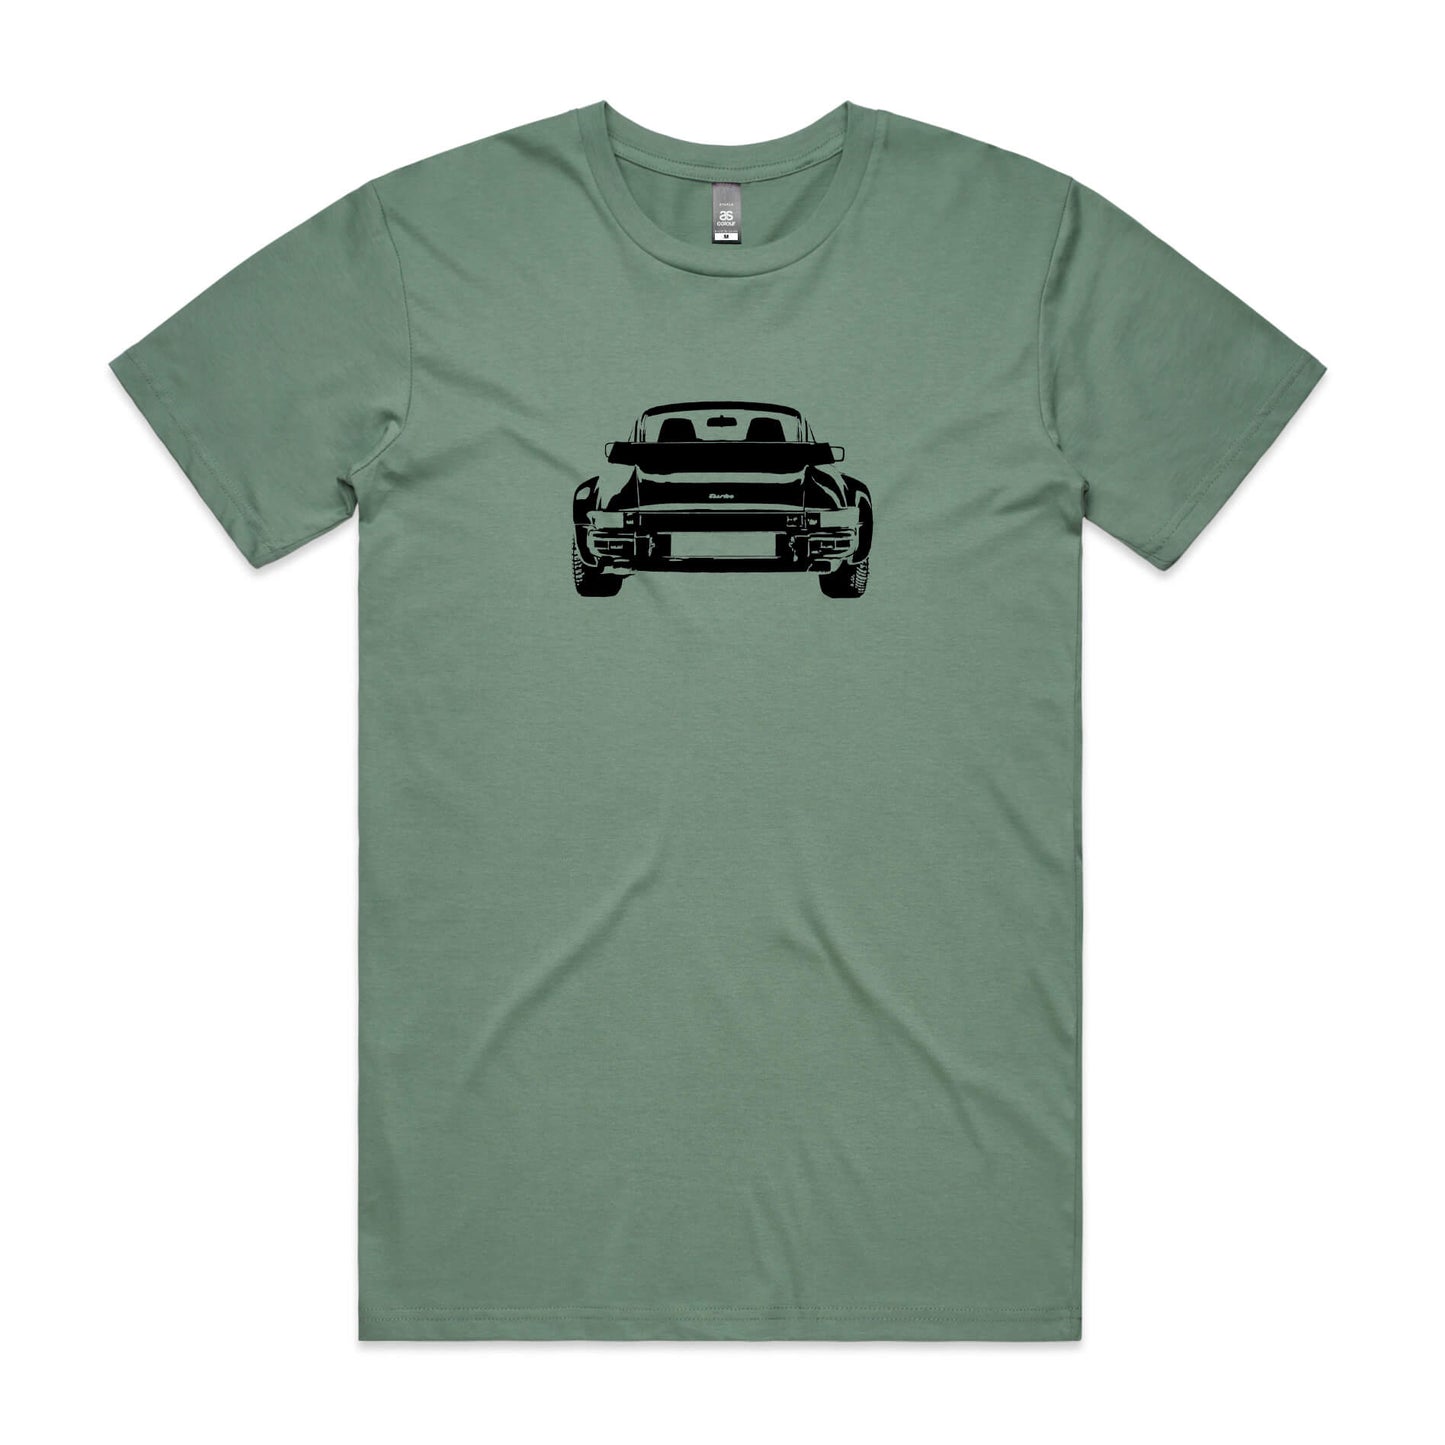 Porsche 911 turbo t-shirt in sage green with a black car graphic